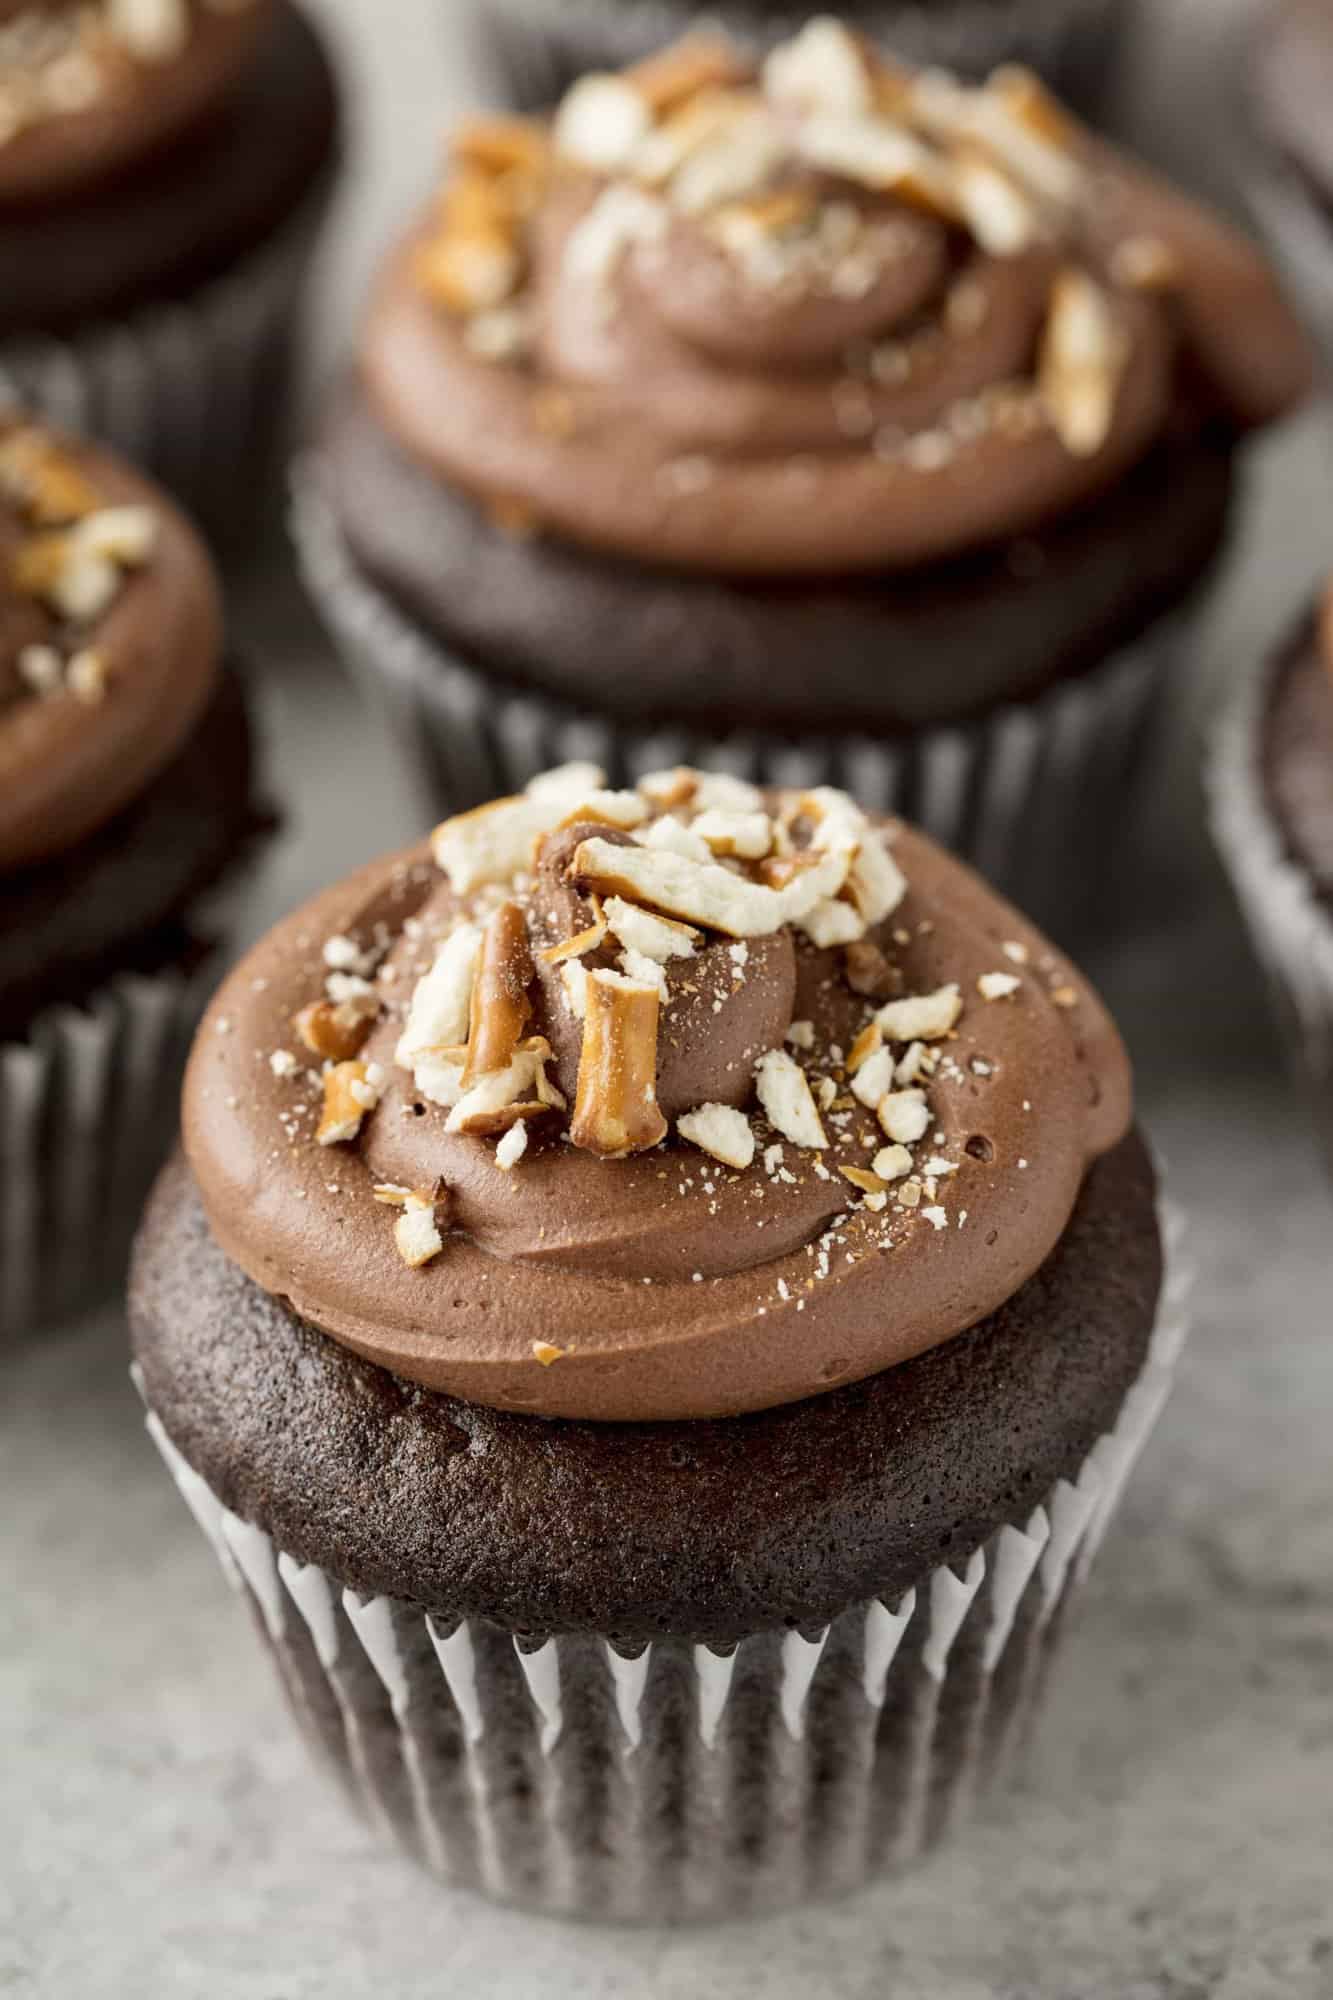 Sinfully decadent chocolate cupcakes filled with a creamy peanut butter filling and topped with whipped chocolate ganache and crushed pretzel. These Chocolate Peanut Butter Pretzel Cupcakes are out of this world!